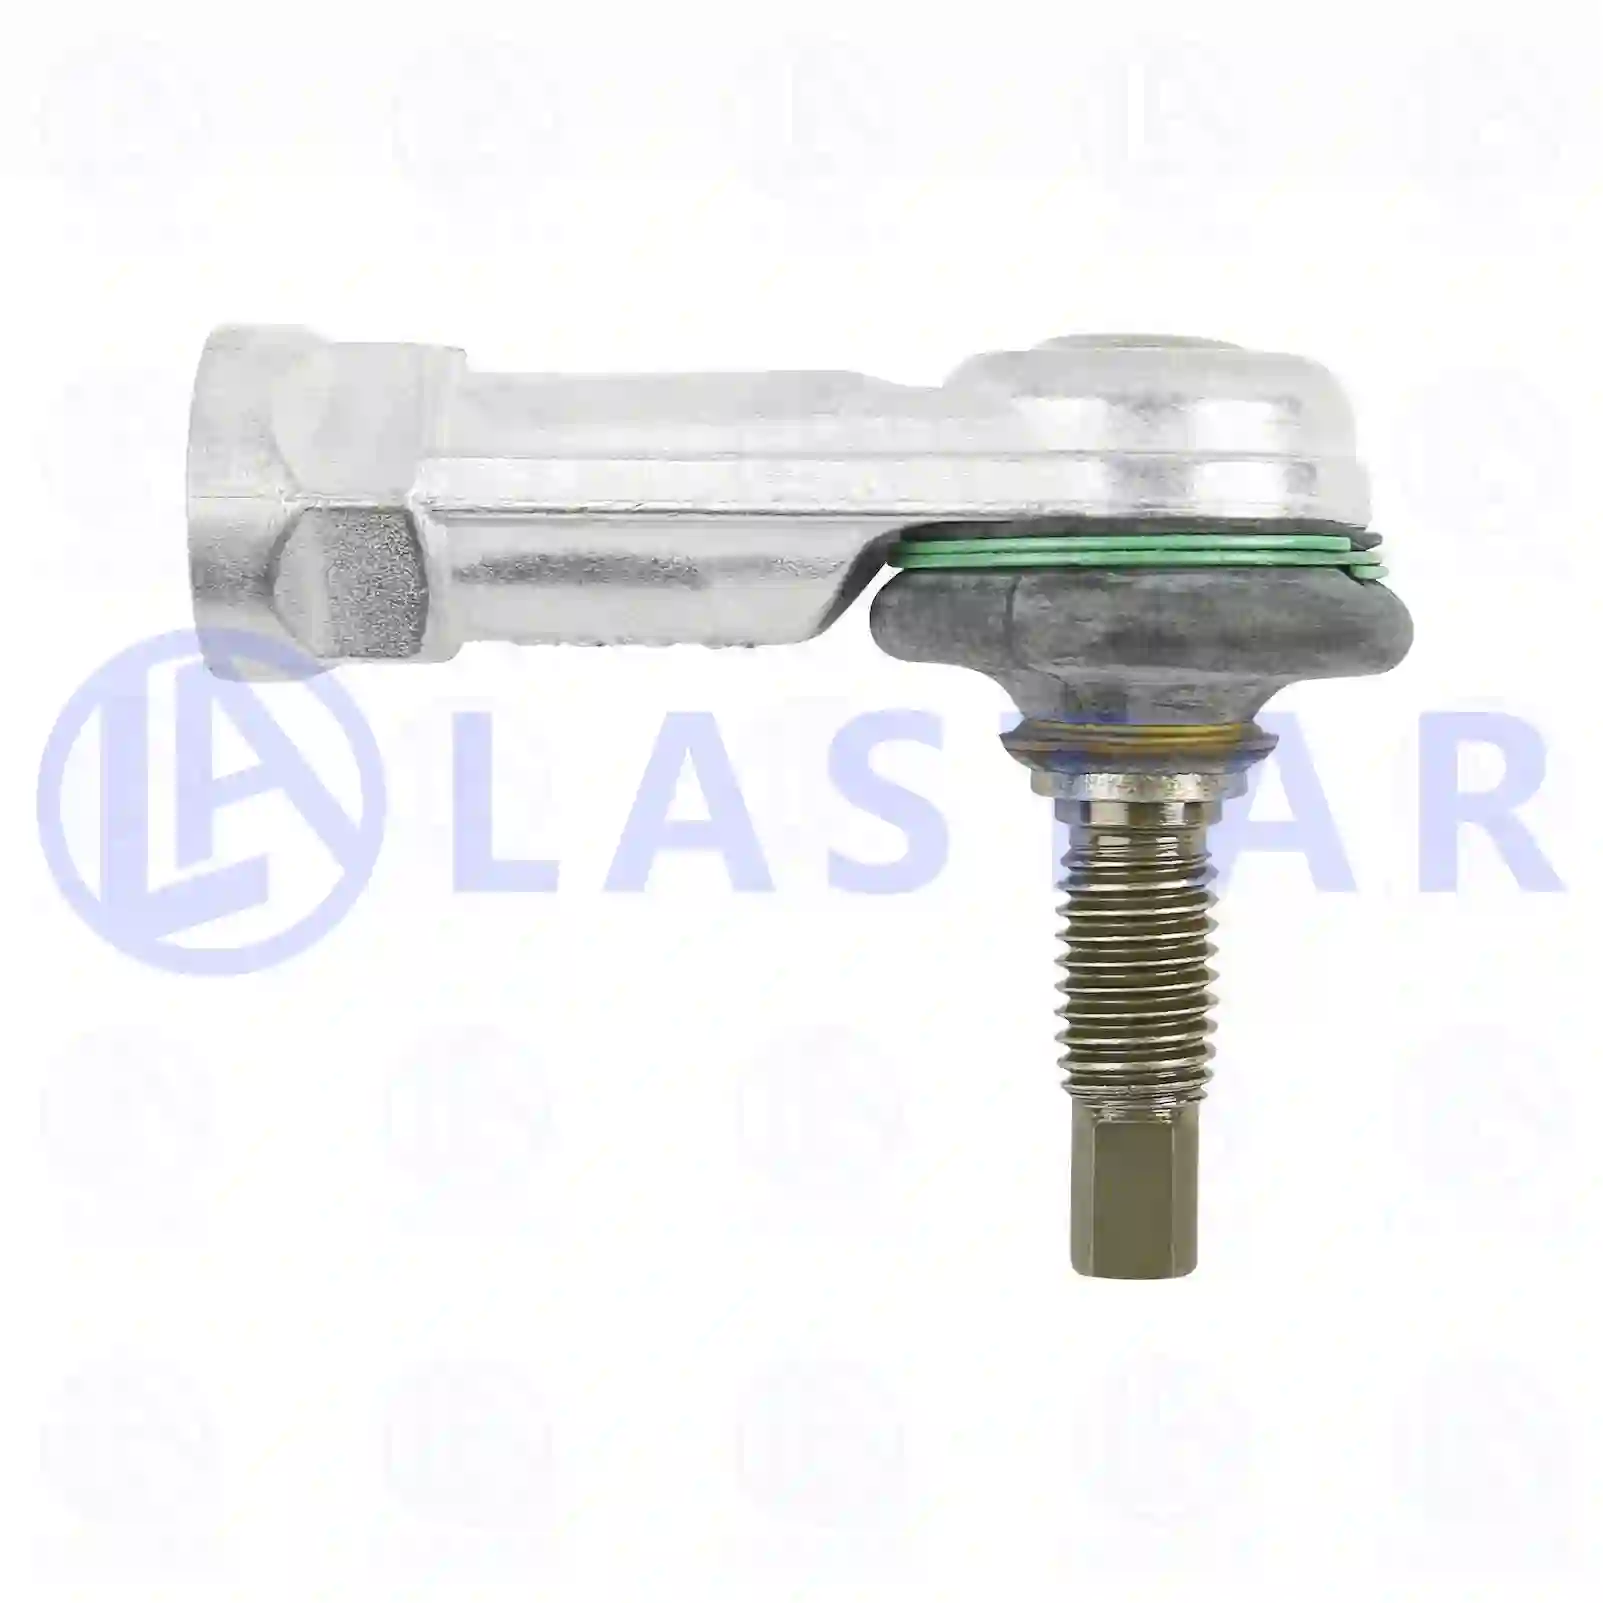 Ball joint, right hand thread, 77731294, 41002118, 41203863, 41288050, 42041327, 42079851, 42079853, ZG40148-0008 ||  77731294 Lastar Spare Part | Truck Spare Parts, Auotomotive Spare Parts Ball joint, right hand thread, 77731294, 41002118, 41203863, 41288050, 42041327, 42079851, 42079853, ZG40148-0008 ||  77731294 Lastar Spare Part | Truck Spare Parts, Auotomotive Spare Parts